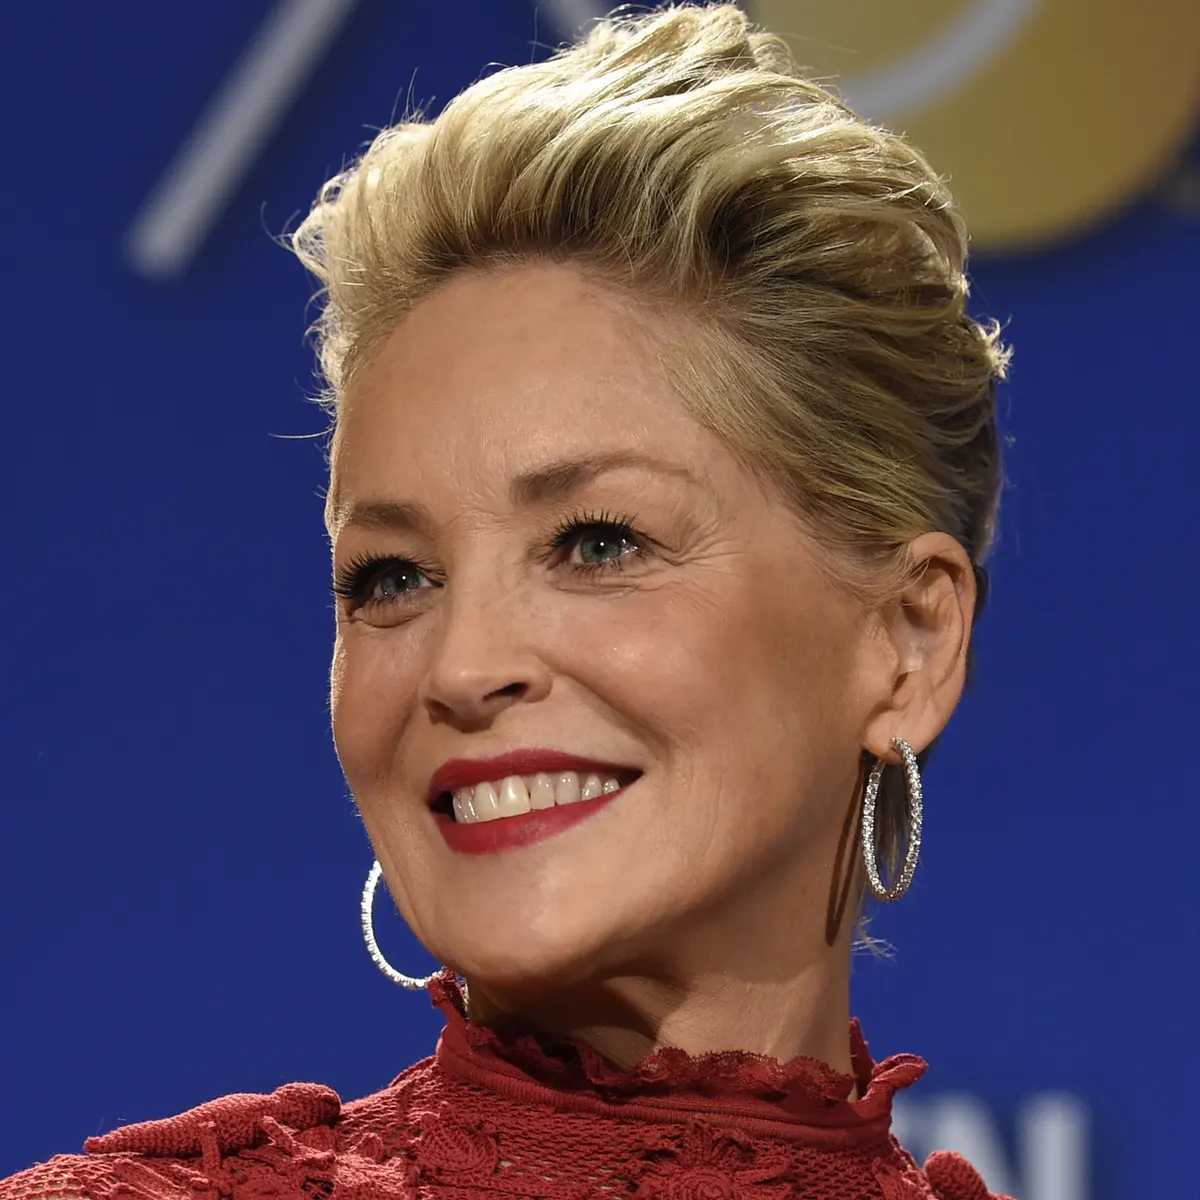 'I've seen it all': Sharon Stone's powerful reflection on sexual harassment in Hollywood"